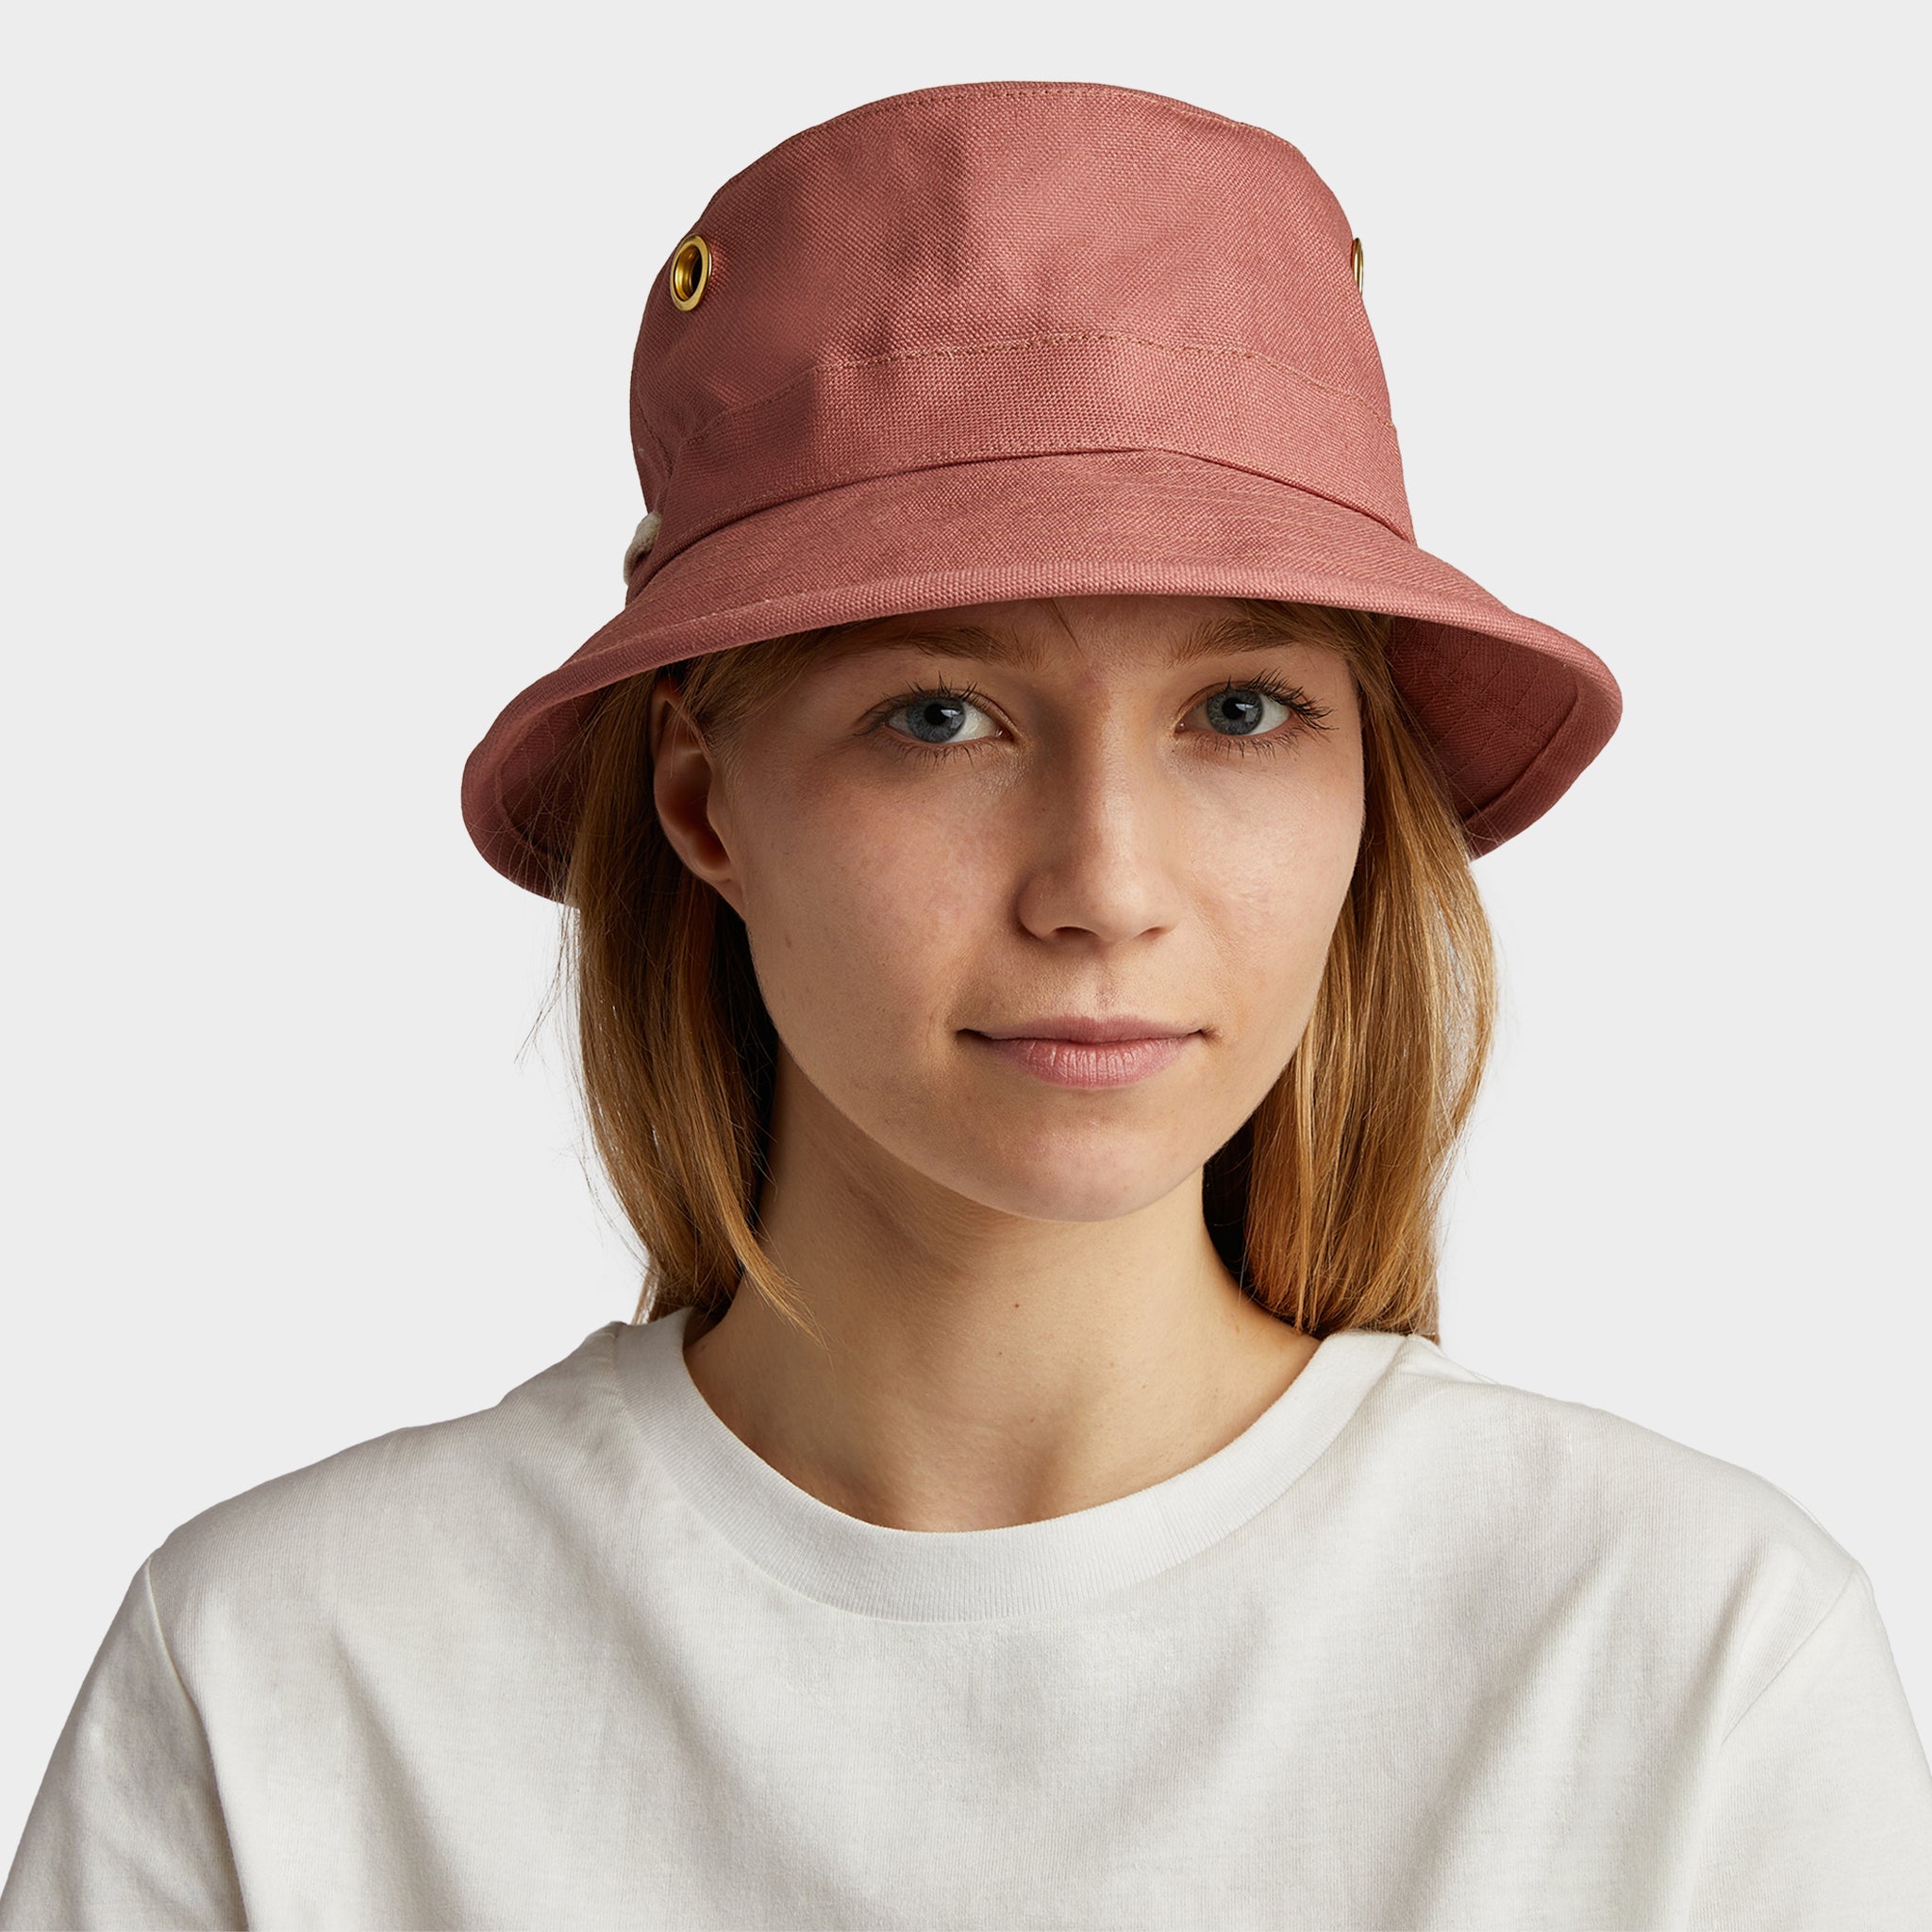 Cord Bucket Hat by Carhartt Online, THE ICONIC